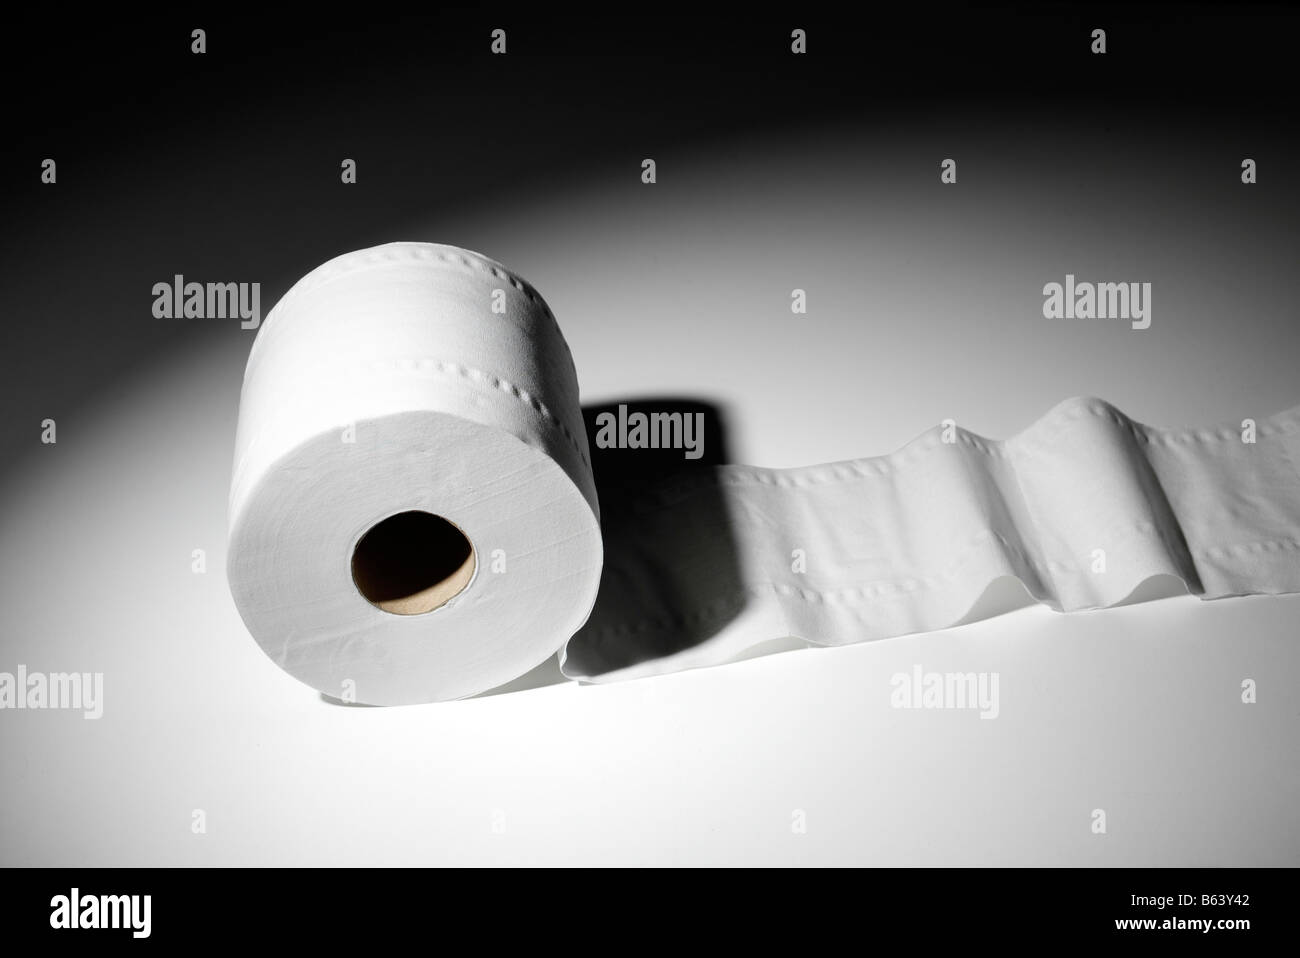 Toilet roll unravelling Stock Photo